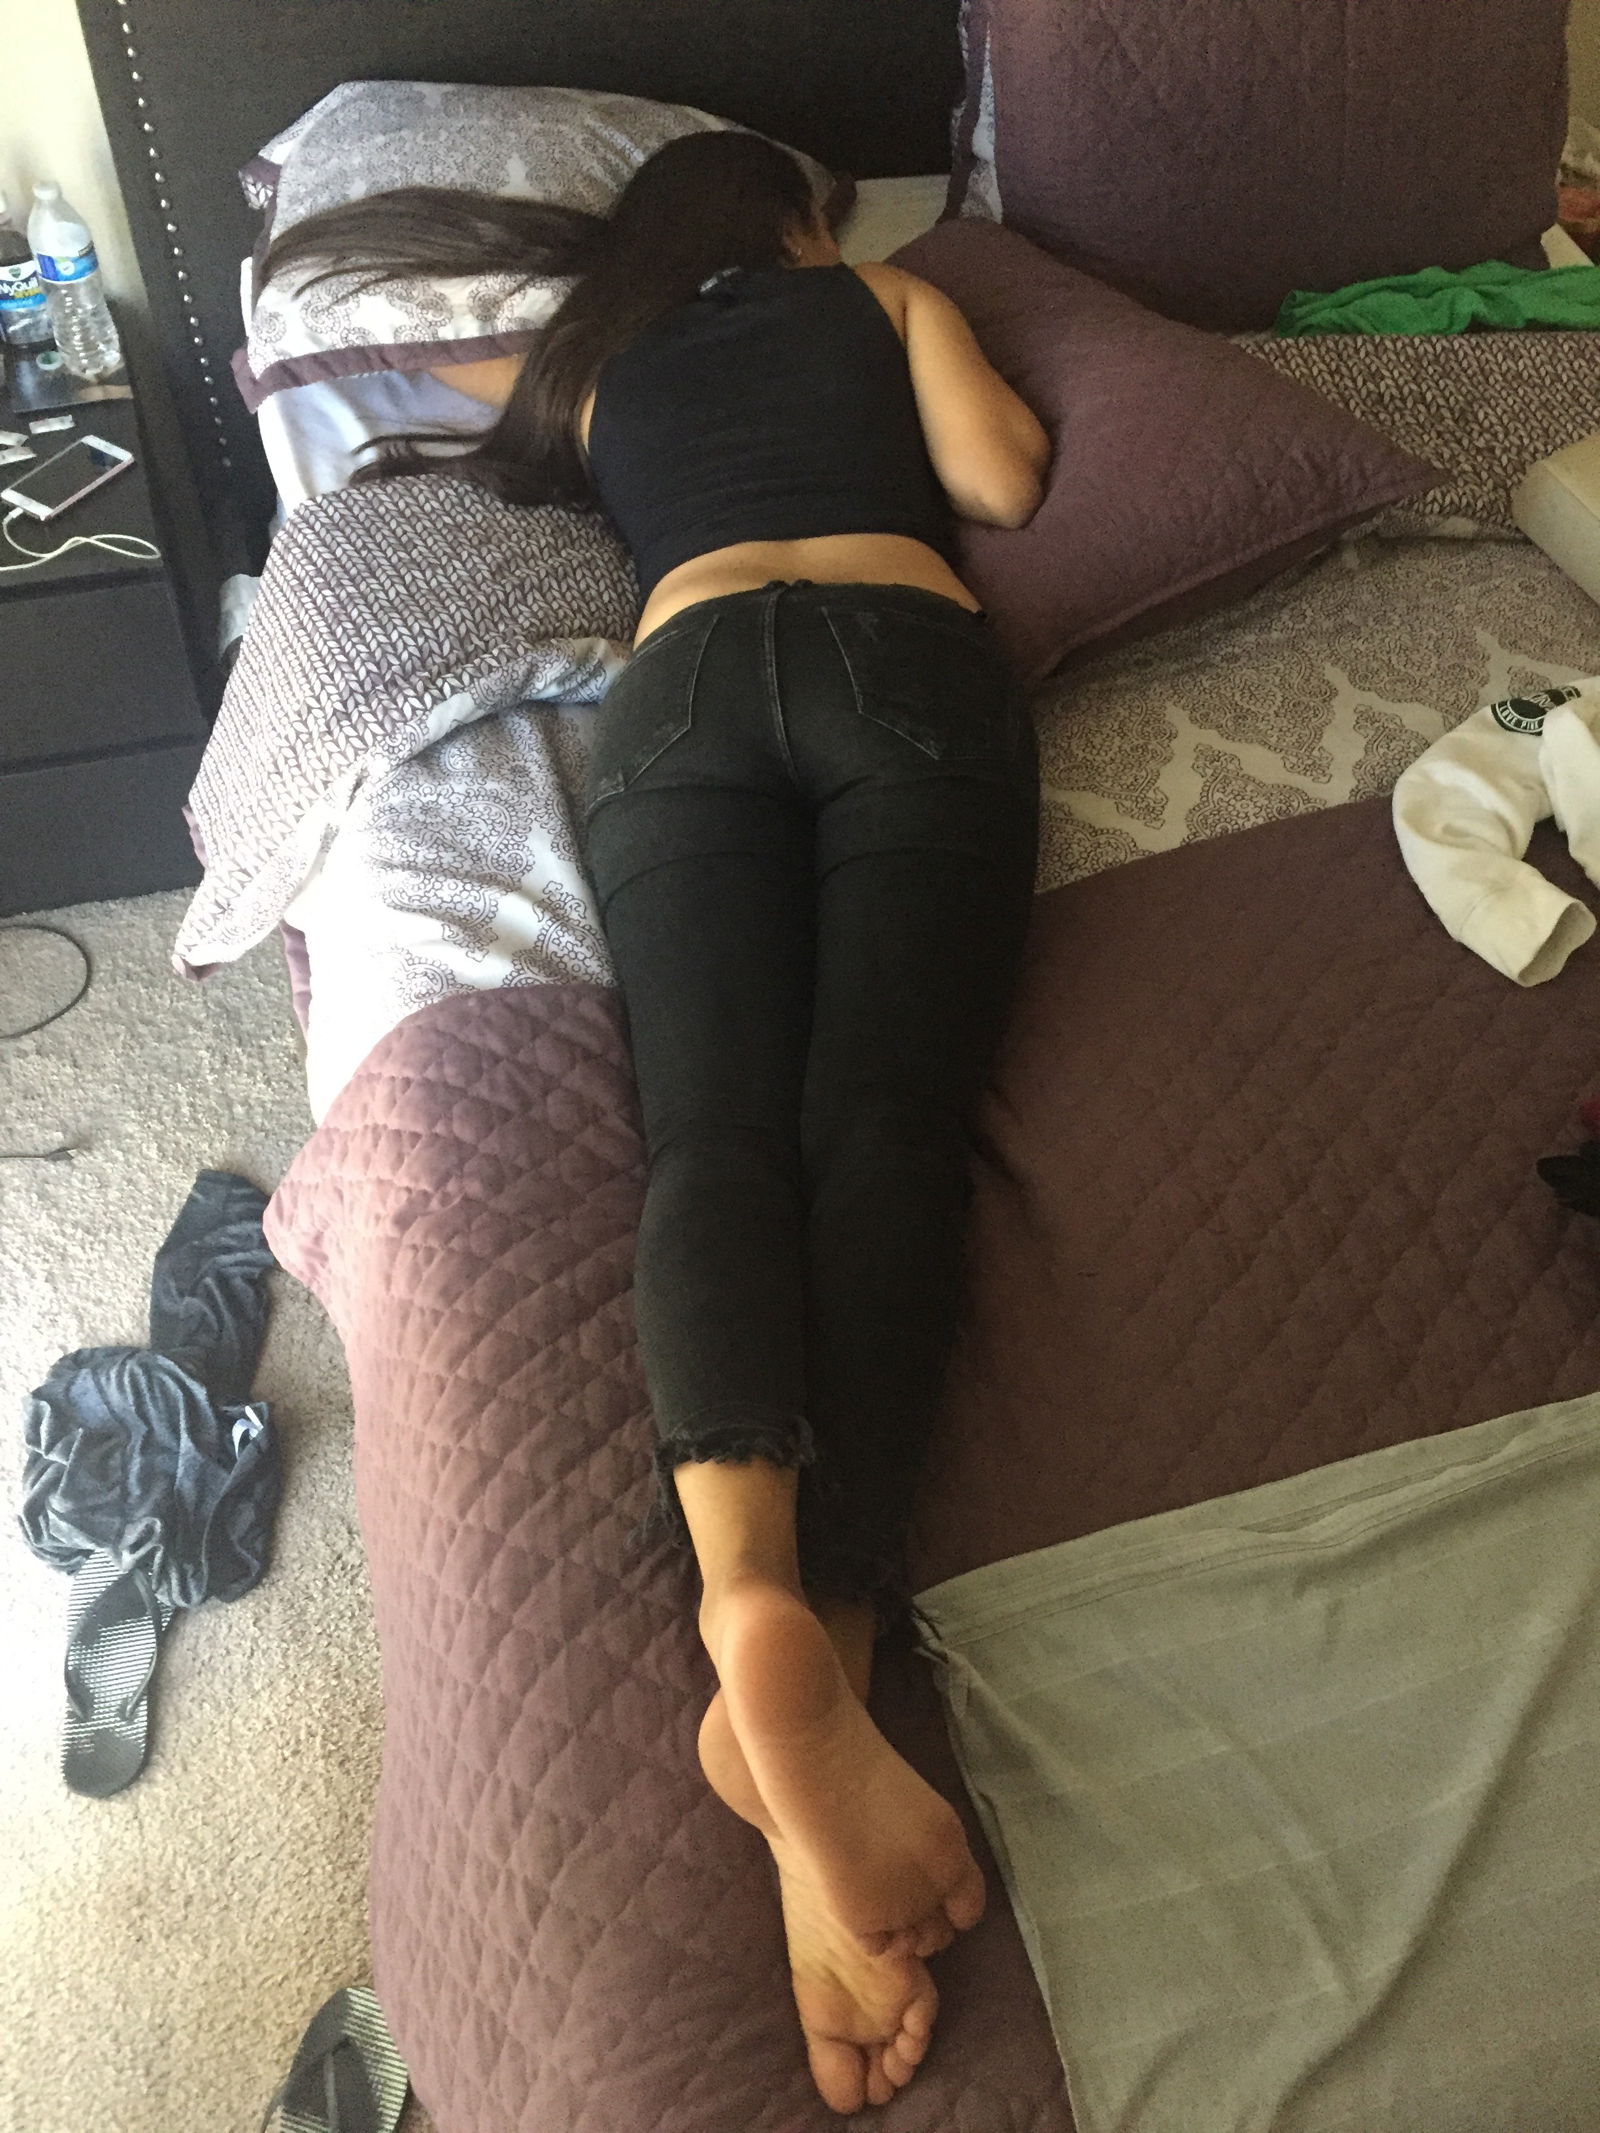 Photo by Nilegoddess with the username @Nilegoddess, who is a star user,  November 15, 2017 at 8:59 AM and the text says '#Sleeping  #toes  #feet  #fetish  #teen  #chick  #jeans  #passed  #out  #ass  #18  #year  #old  #18  #yo'